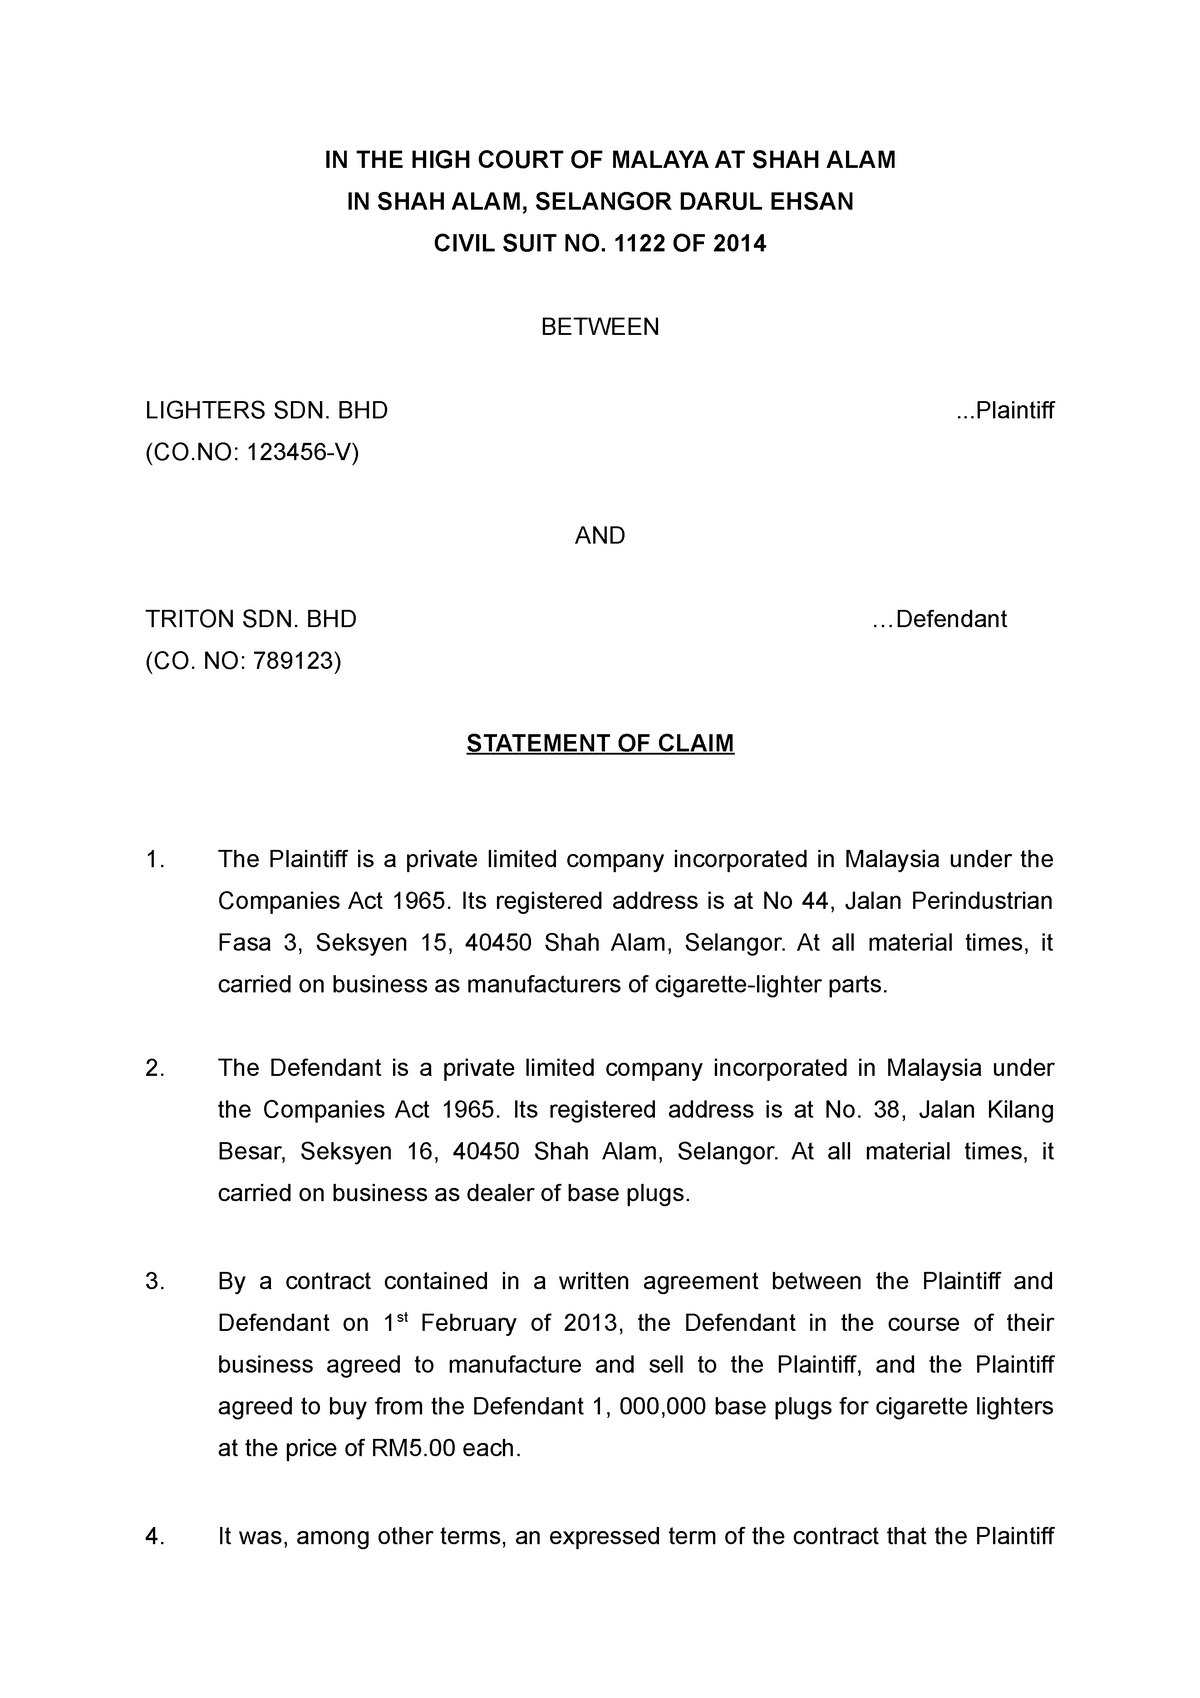 Pleadings - Statement of Claim - IN THE HIGH COURT OF MALAYA AT SHAH